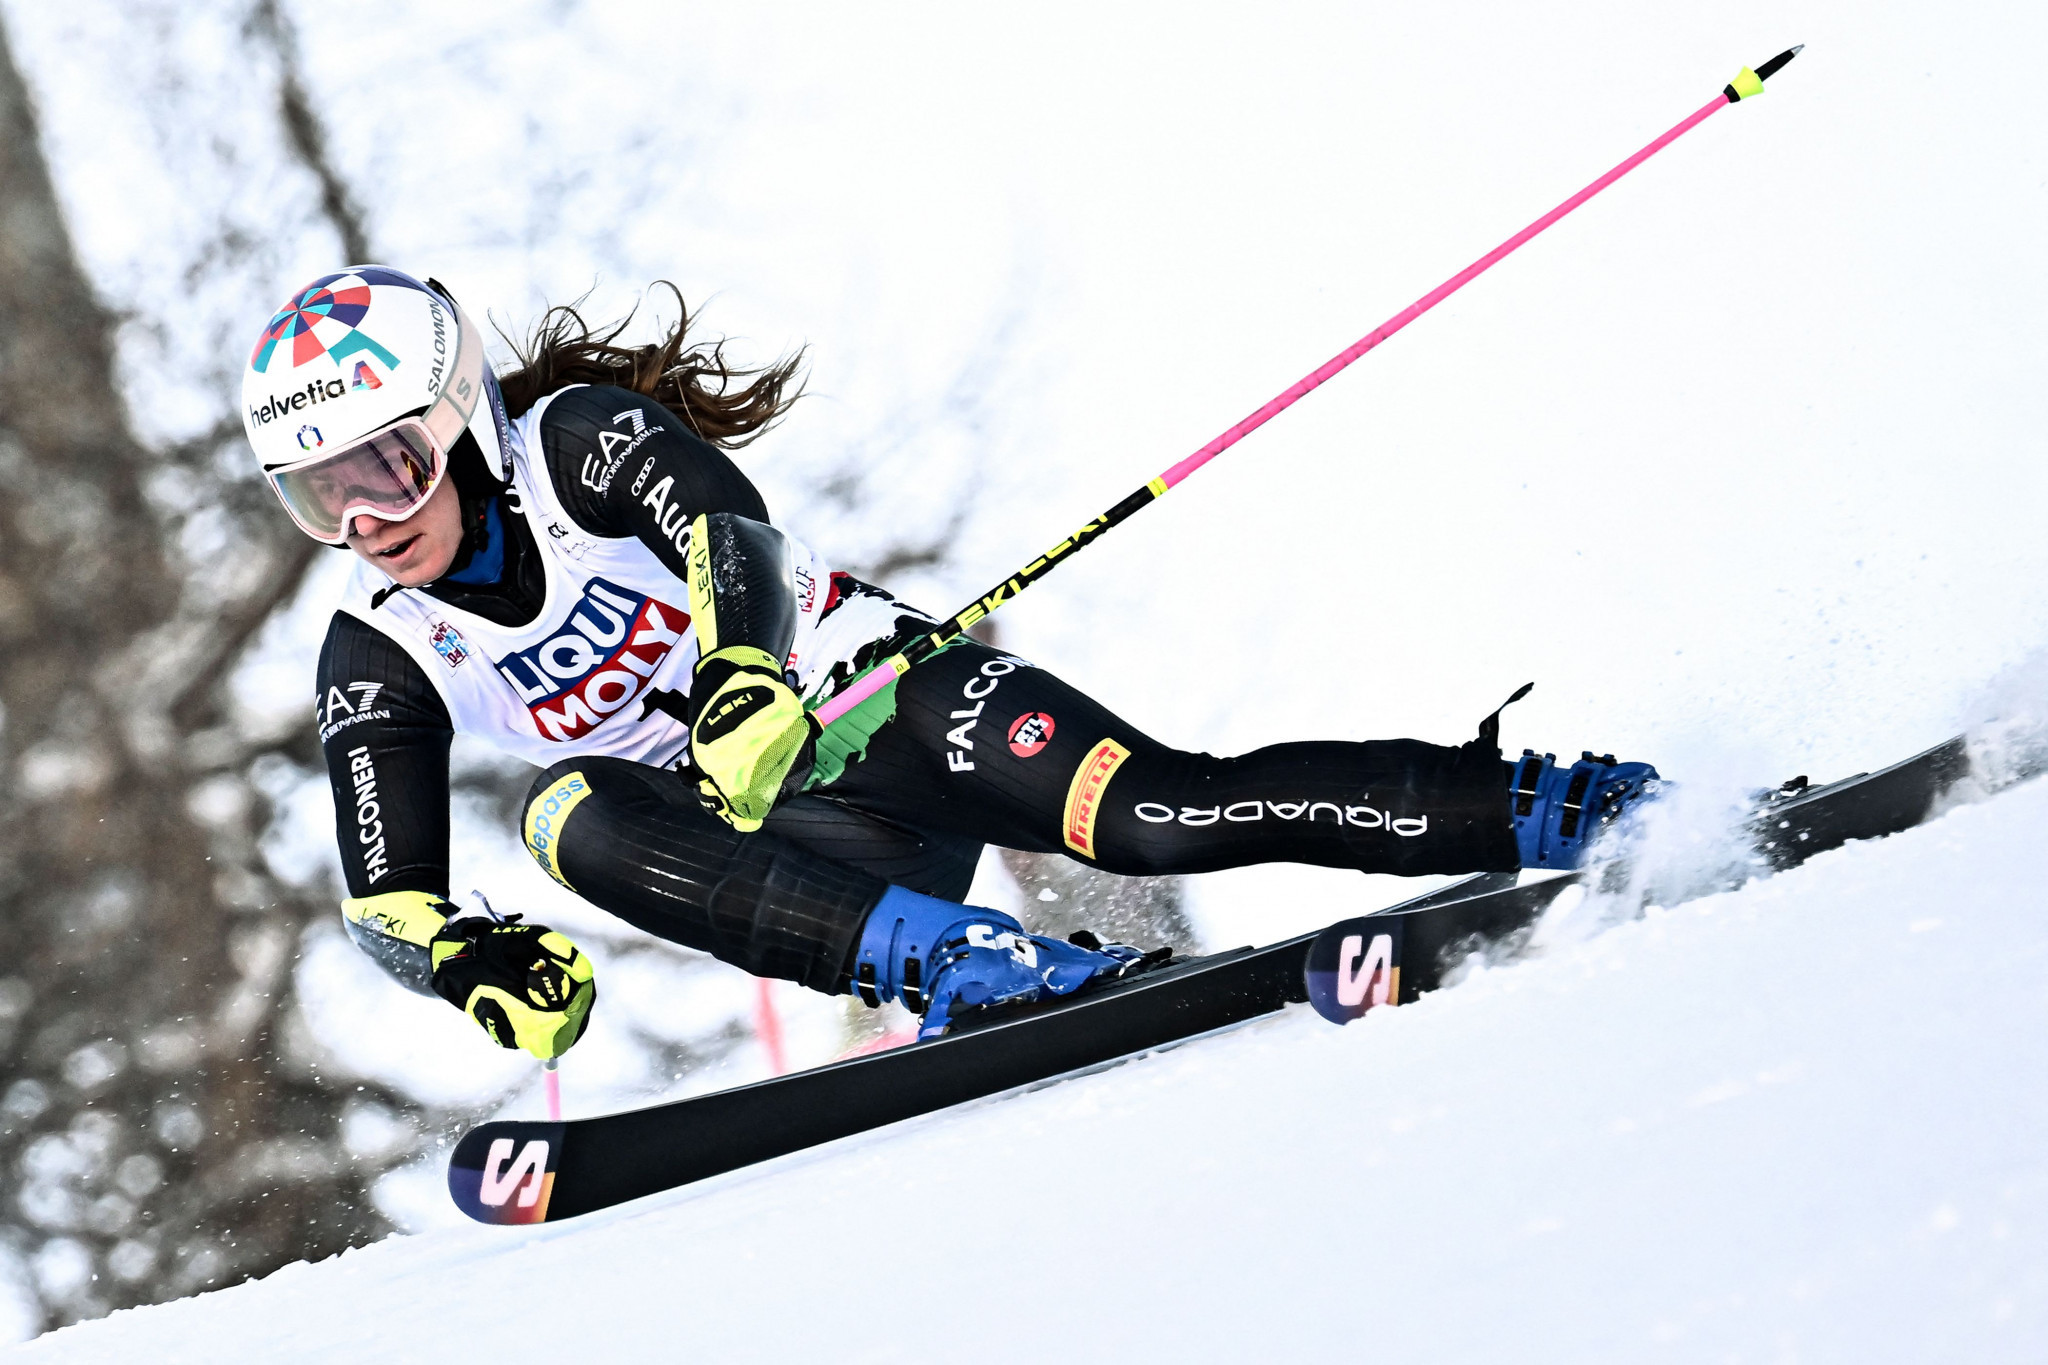 Bassino skis to giant slalom victory on home snow at Sestriere